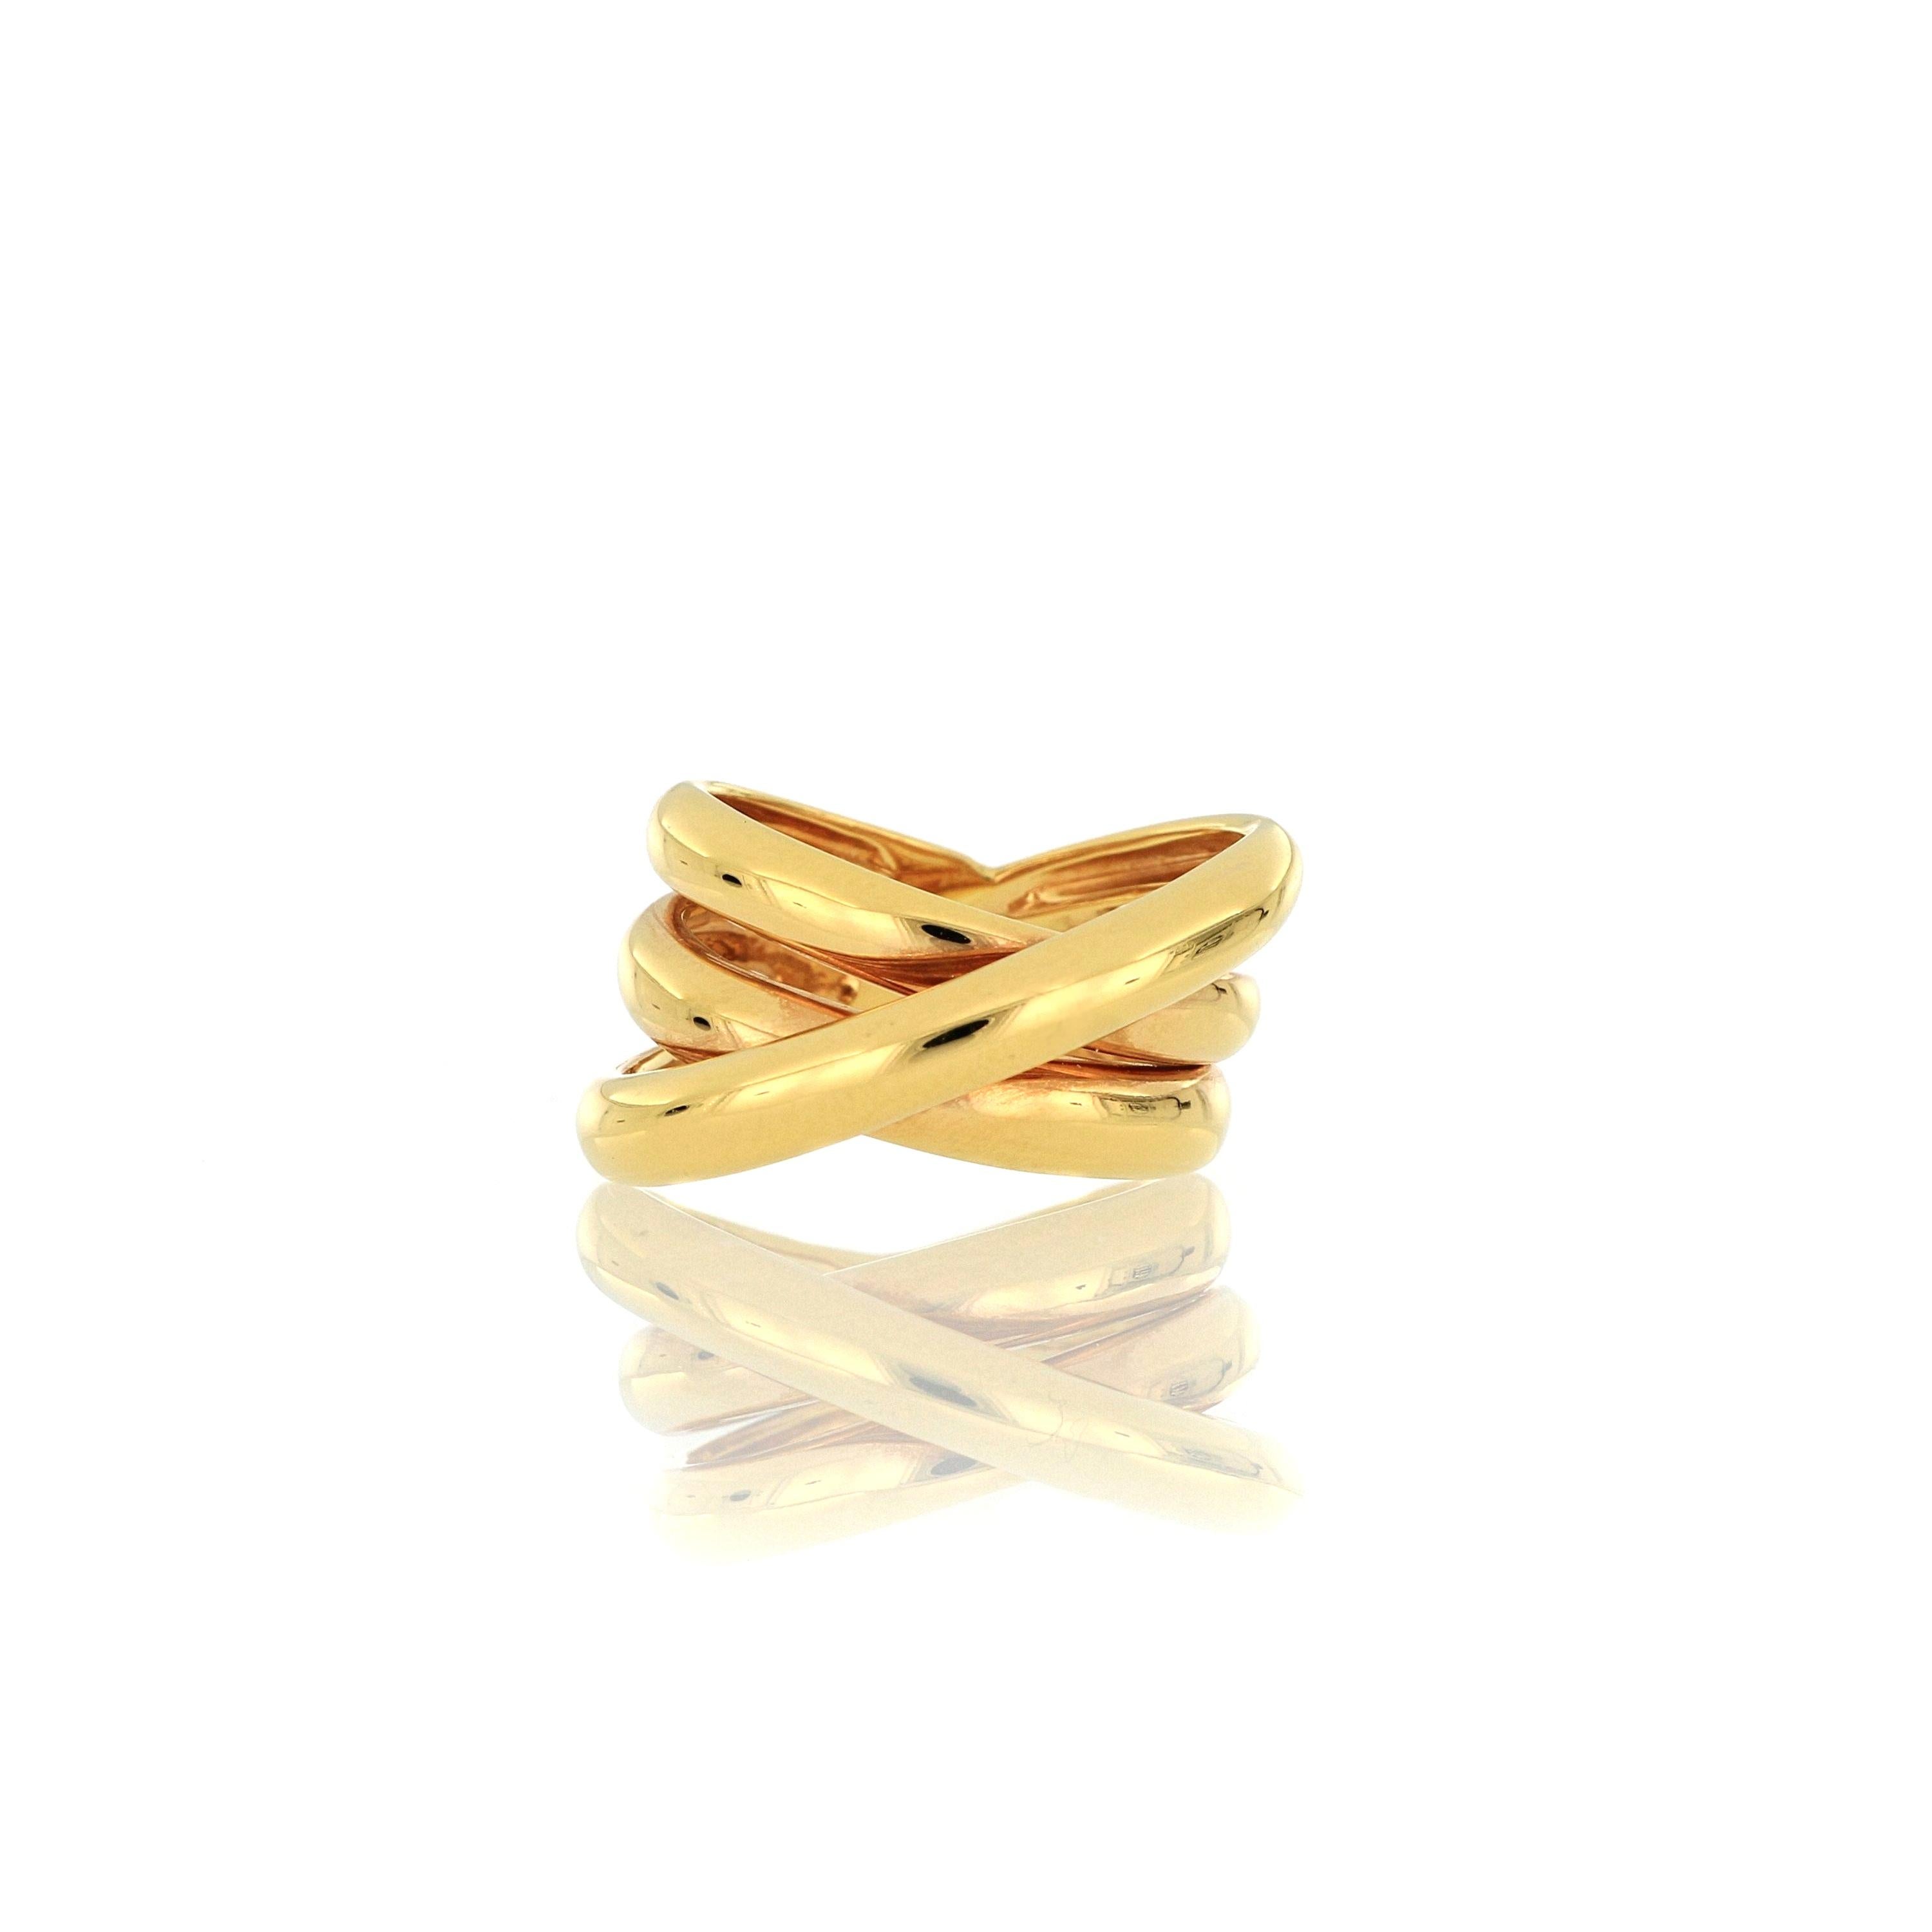 A stylish Italian 18 Karat gold ring. A very beautiful ring with simply and elegant design which can be worn for any occasion.
O’Che 1867 was founded one and a half centuries ago in Macau. The brand is renowned for its high jewellery collections